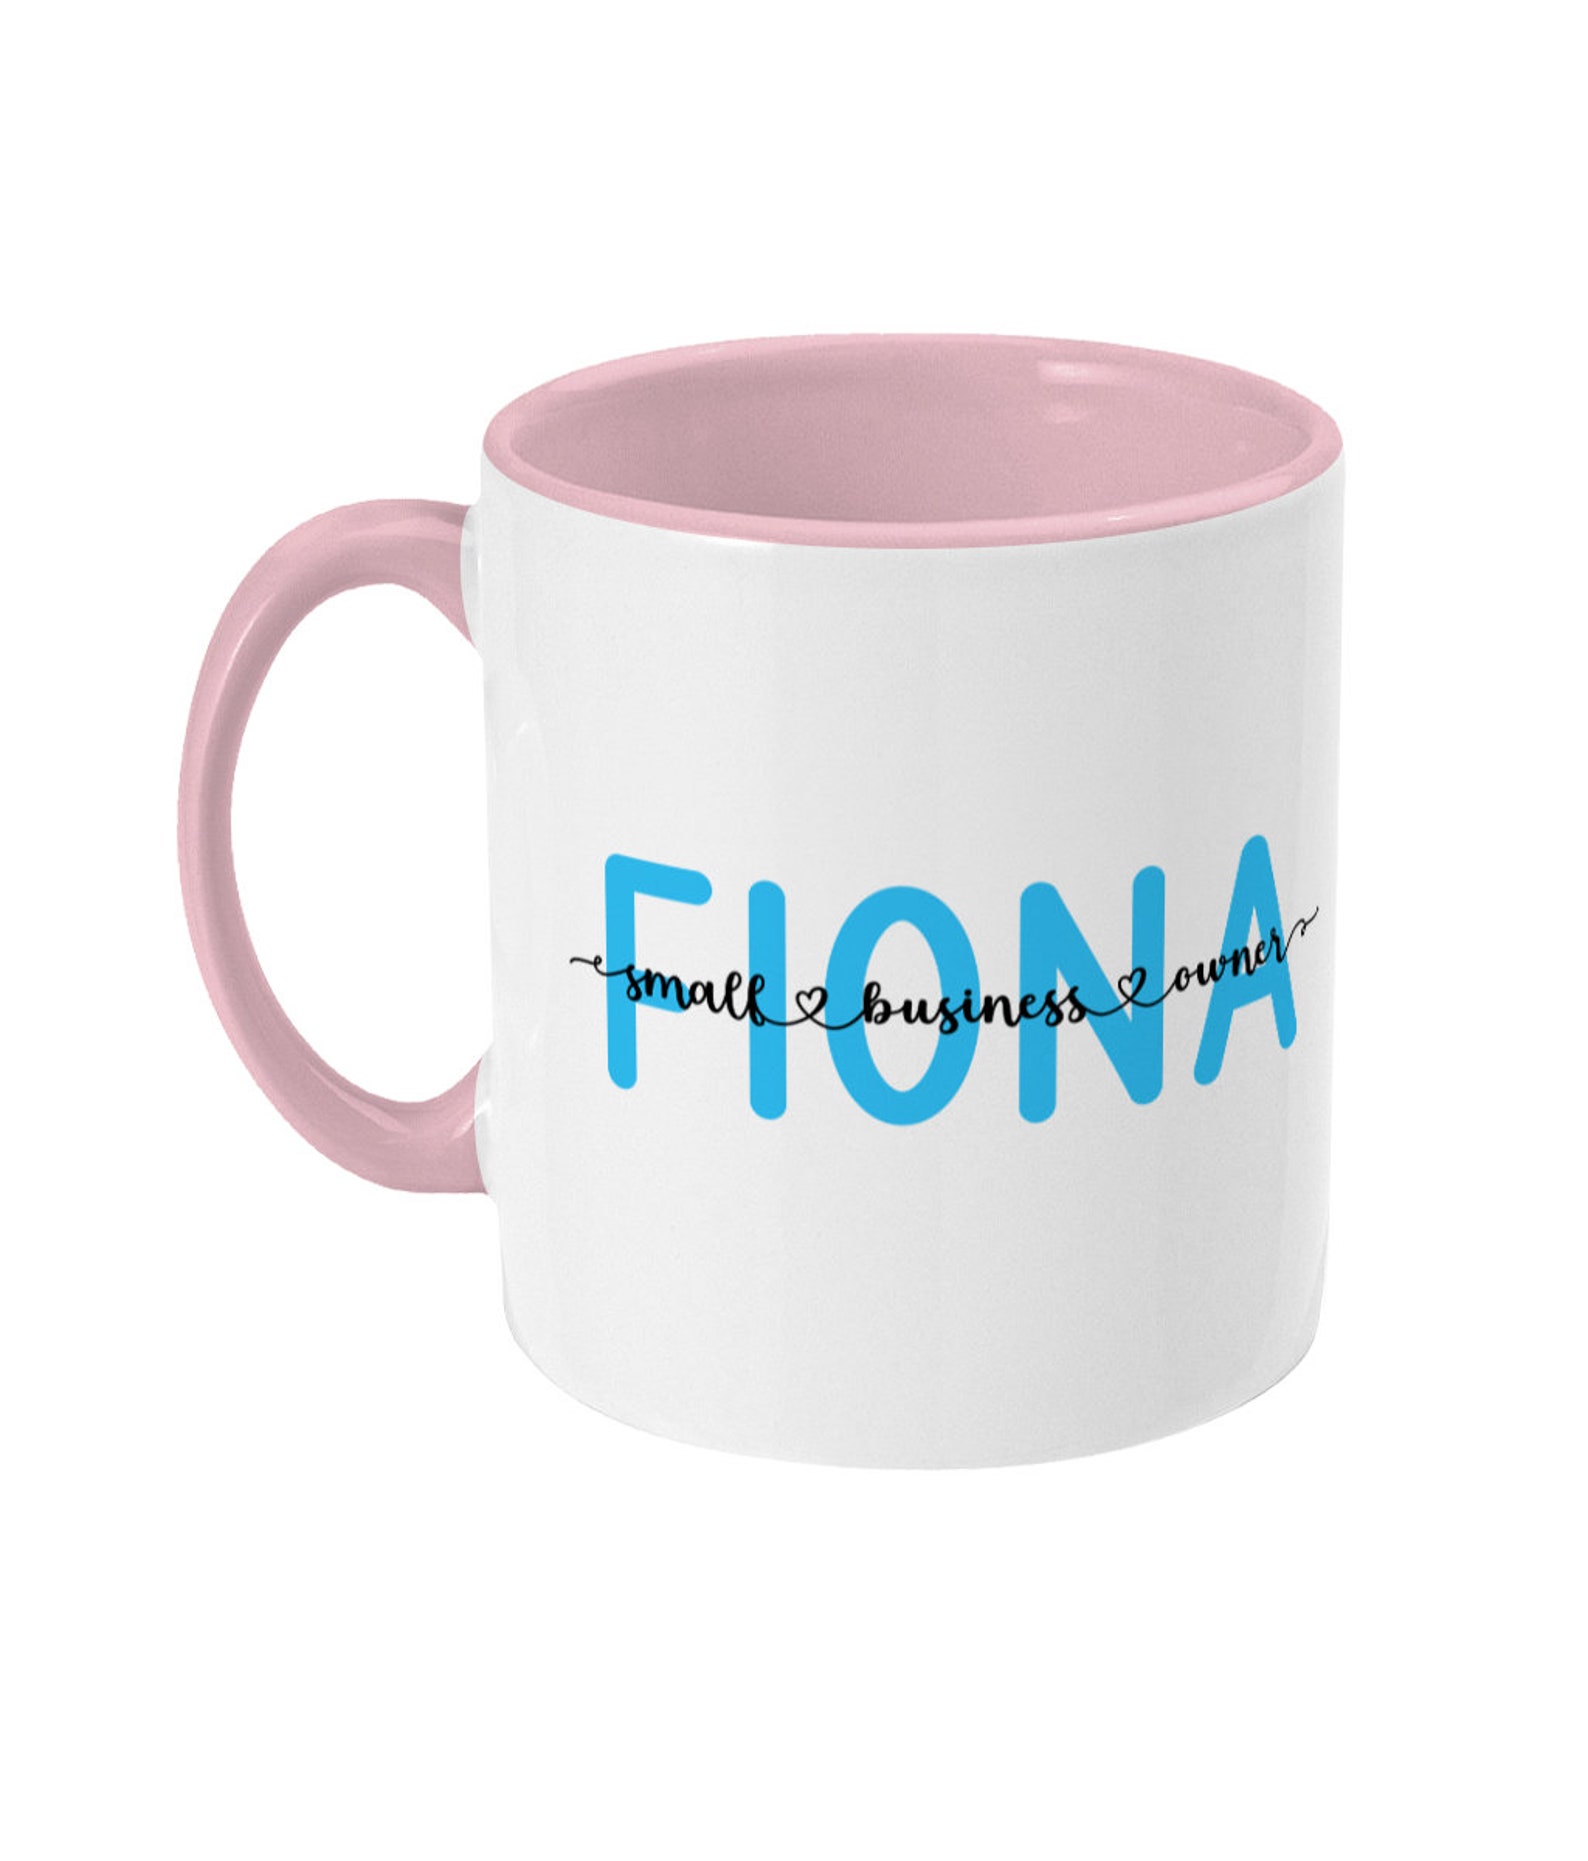 Two Toned Personalised Small Business Owner Mug. Gift for